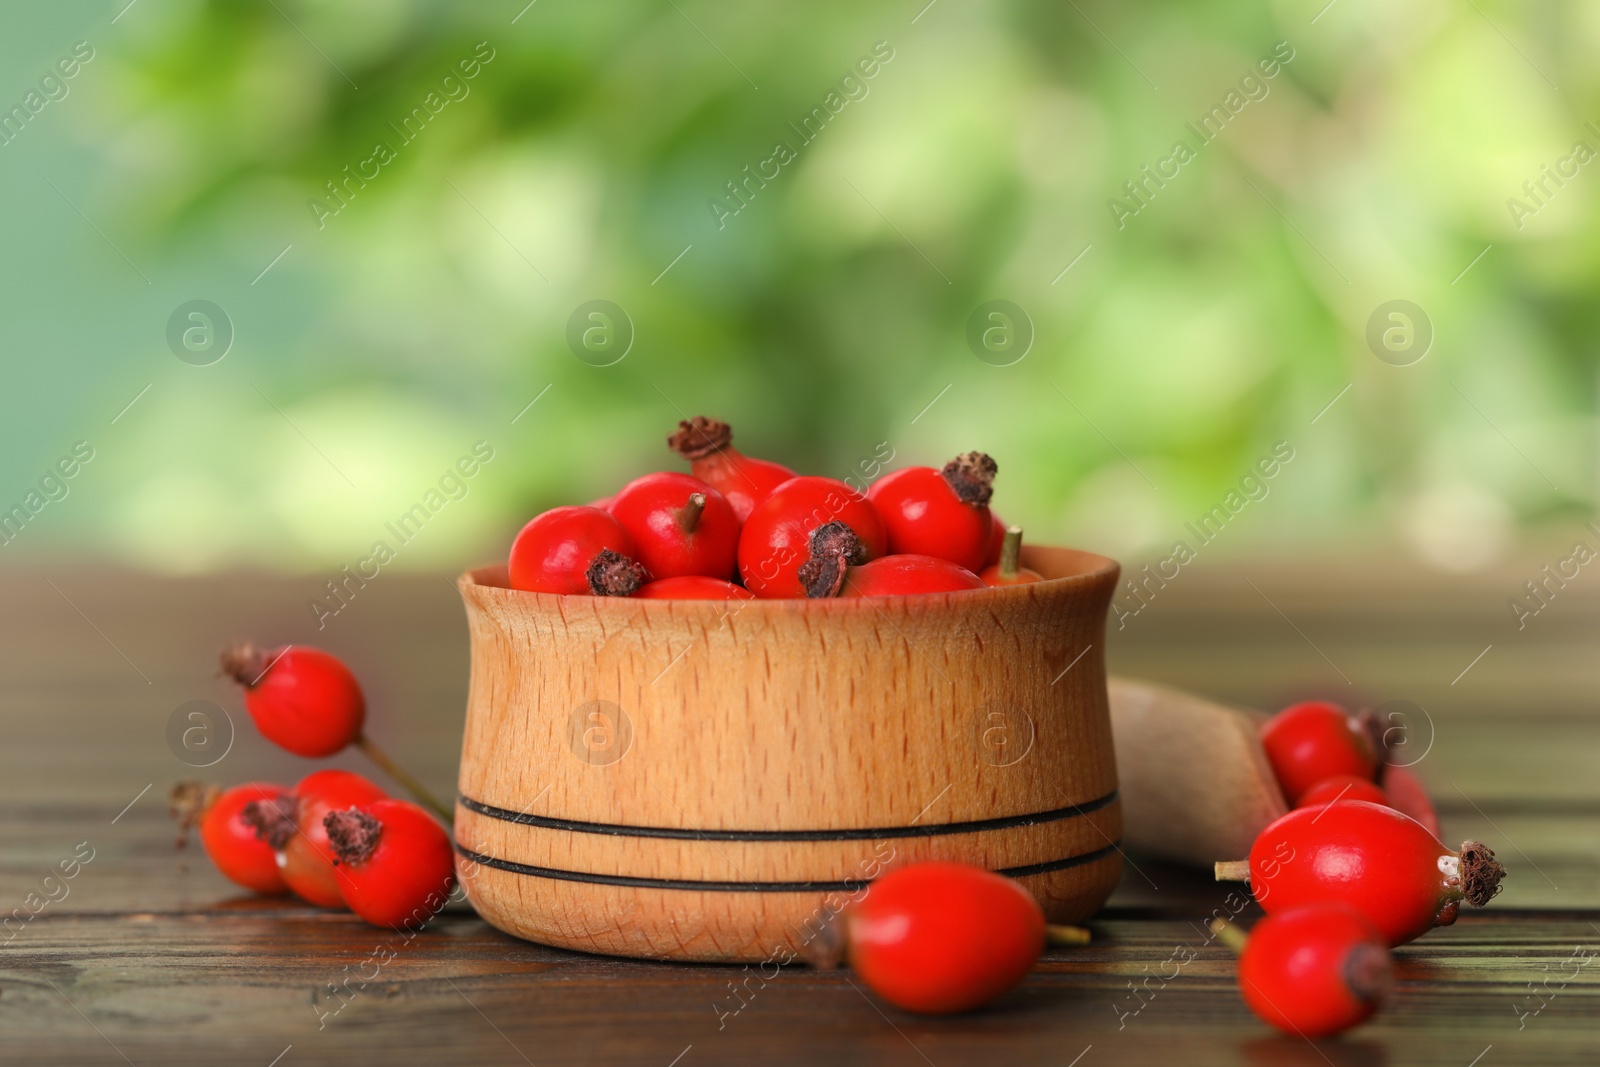 Photo of Ripe rose hip berries with bowl on wooden table